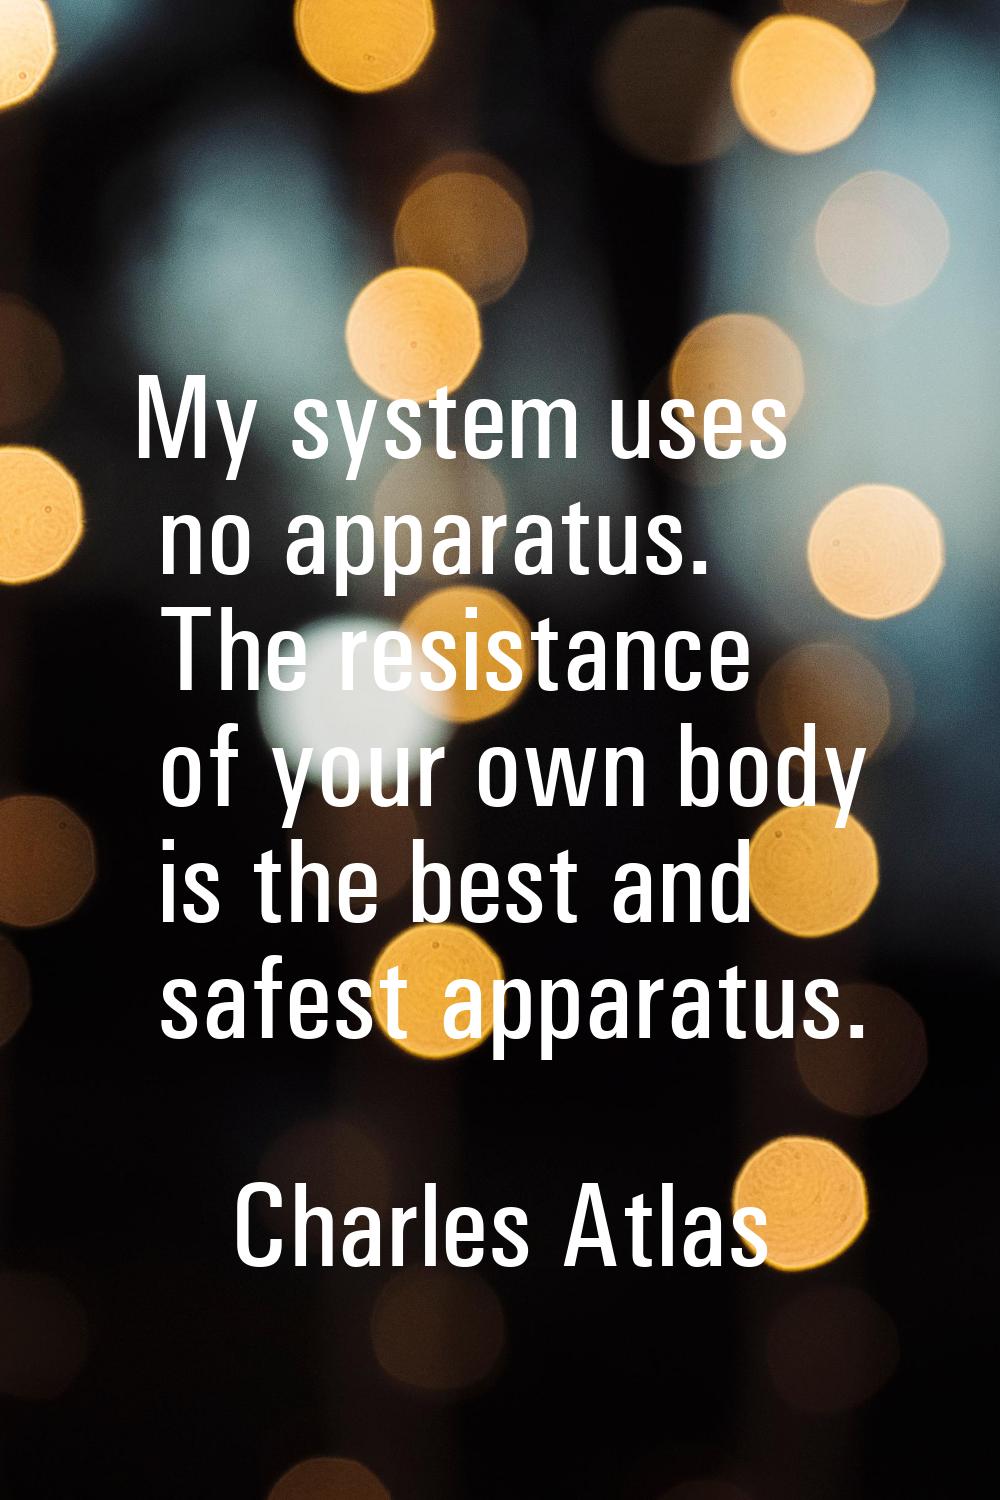 My system uses no apparatus. The resistance of your own body is the best and safest apparatus.